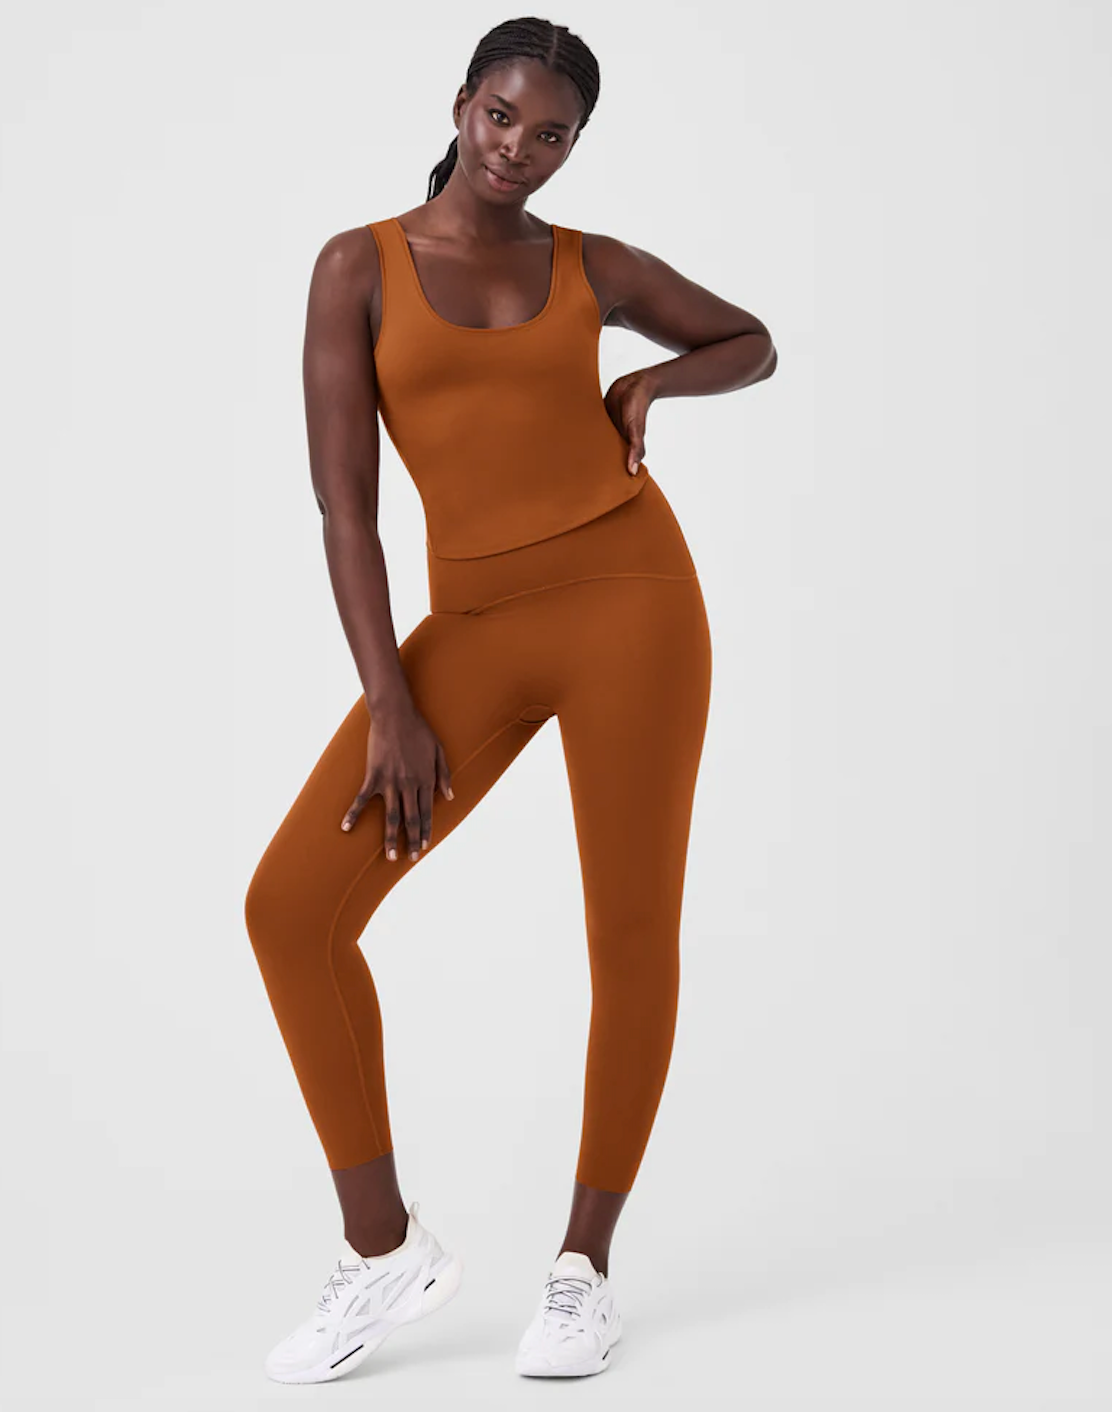 Booty Boost® Active 7/8 Leggings